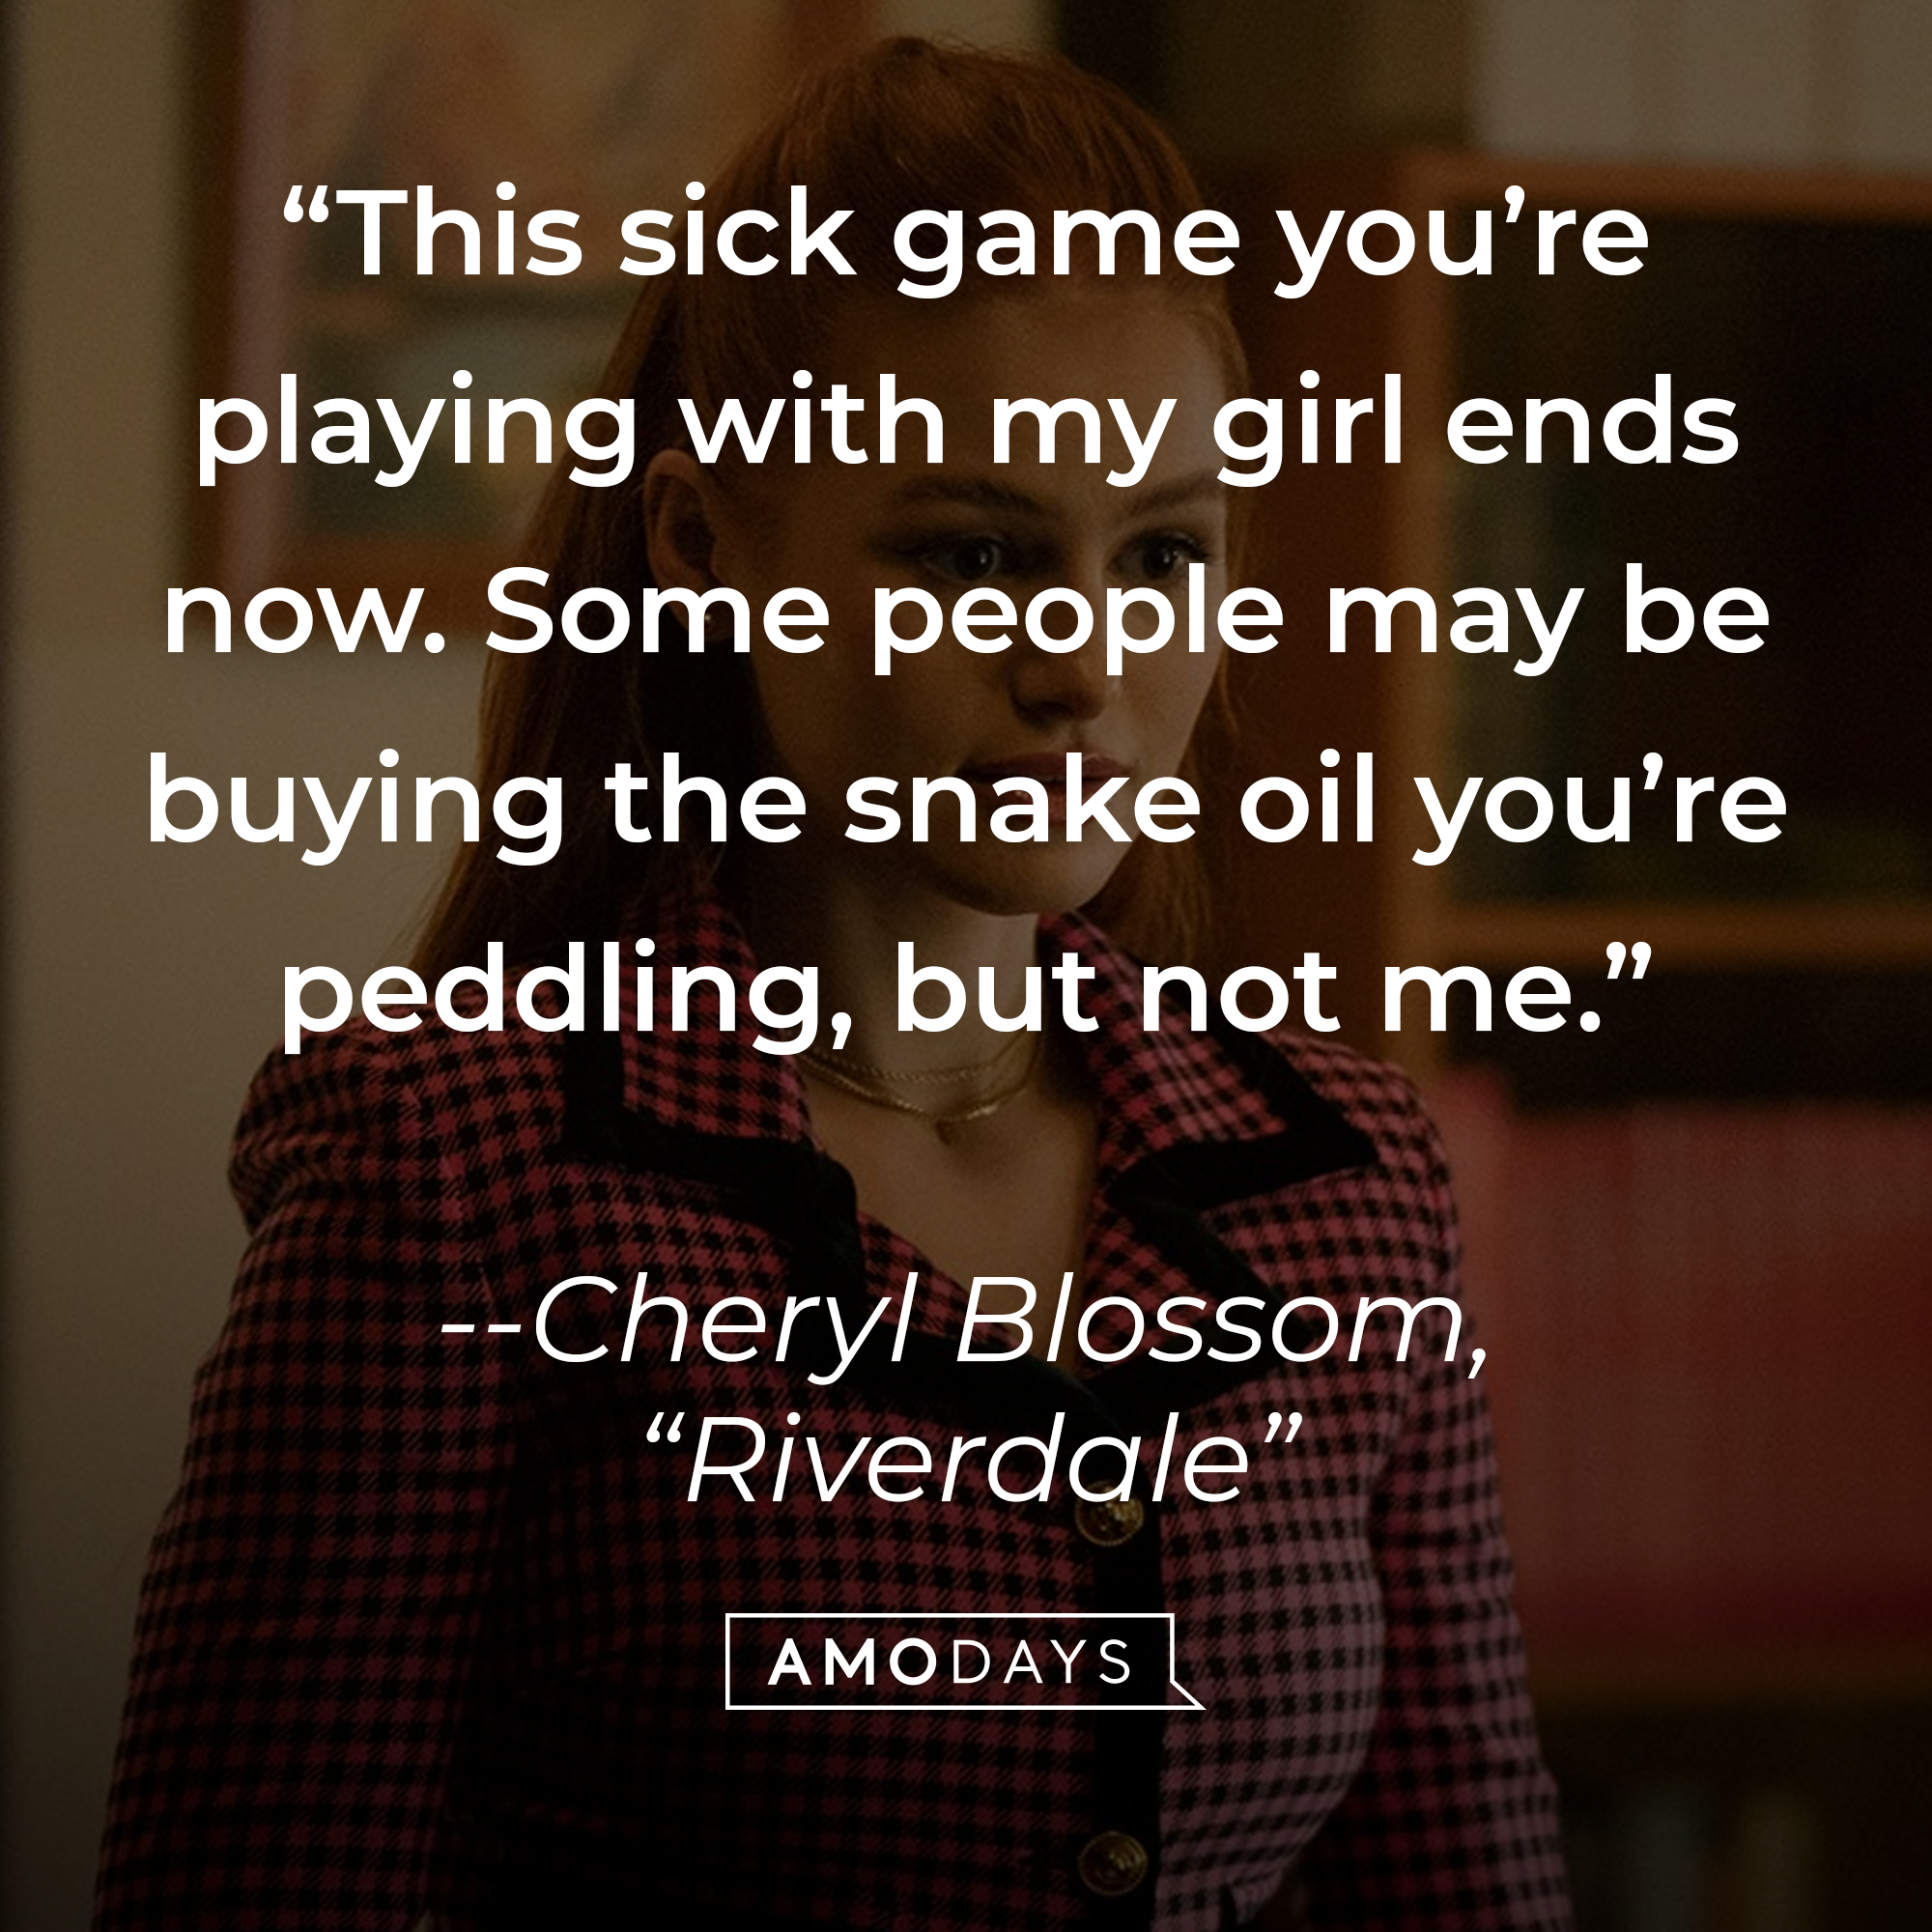 Cheryl Blossom with her quote: “This sick game you’re playing with my girl ends now. Some people may be buying the snake oil you’re peddling, but not me.” | Source: Facebook.com/CWRiverdale